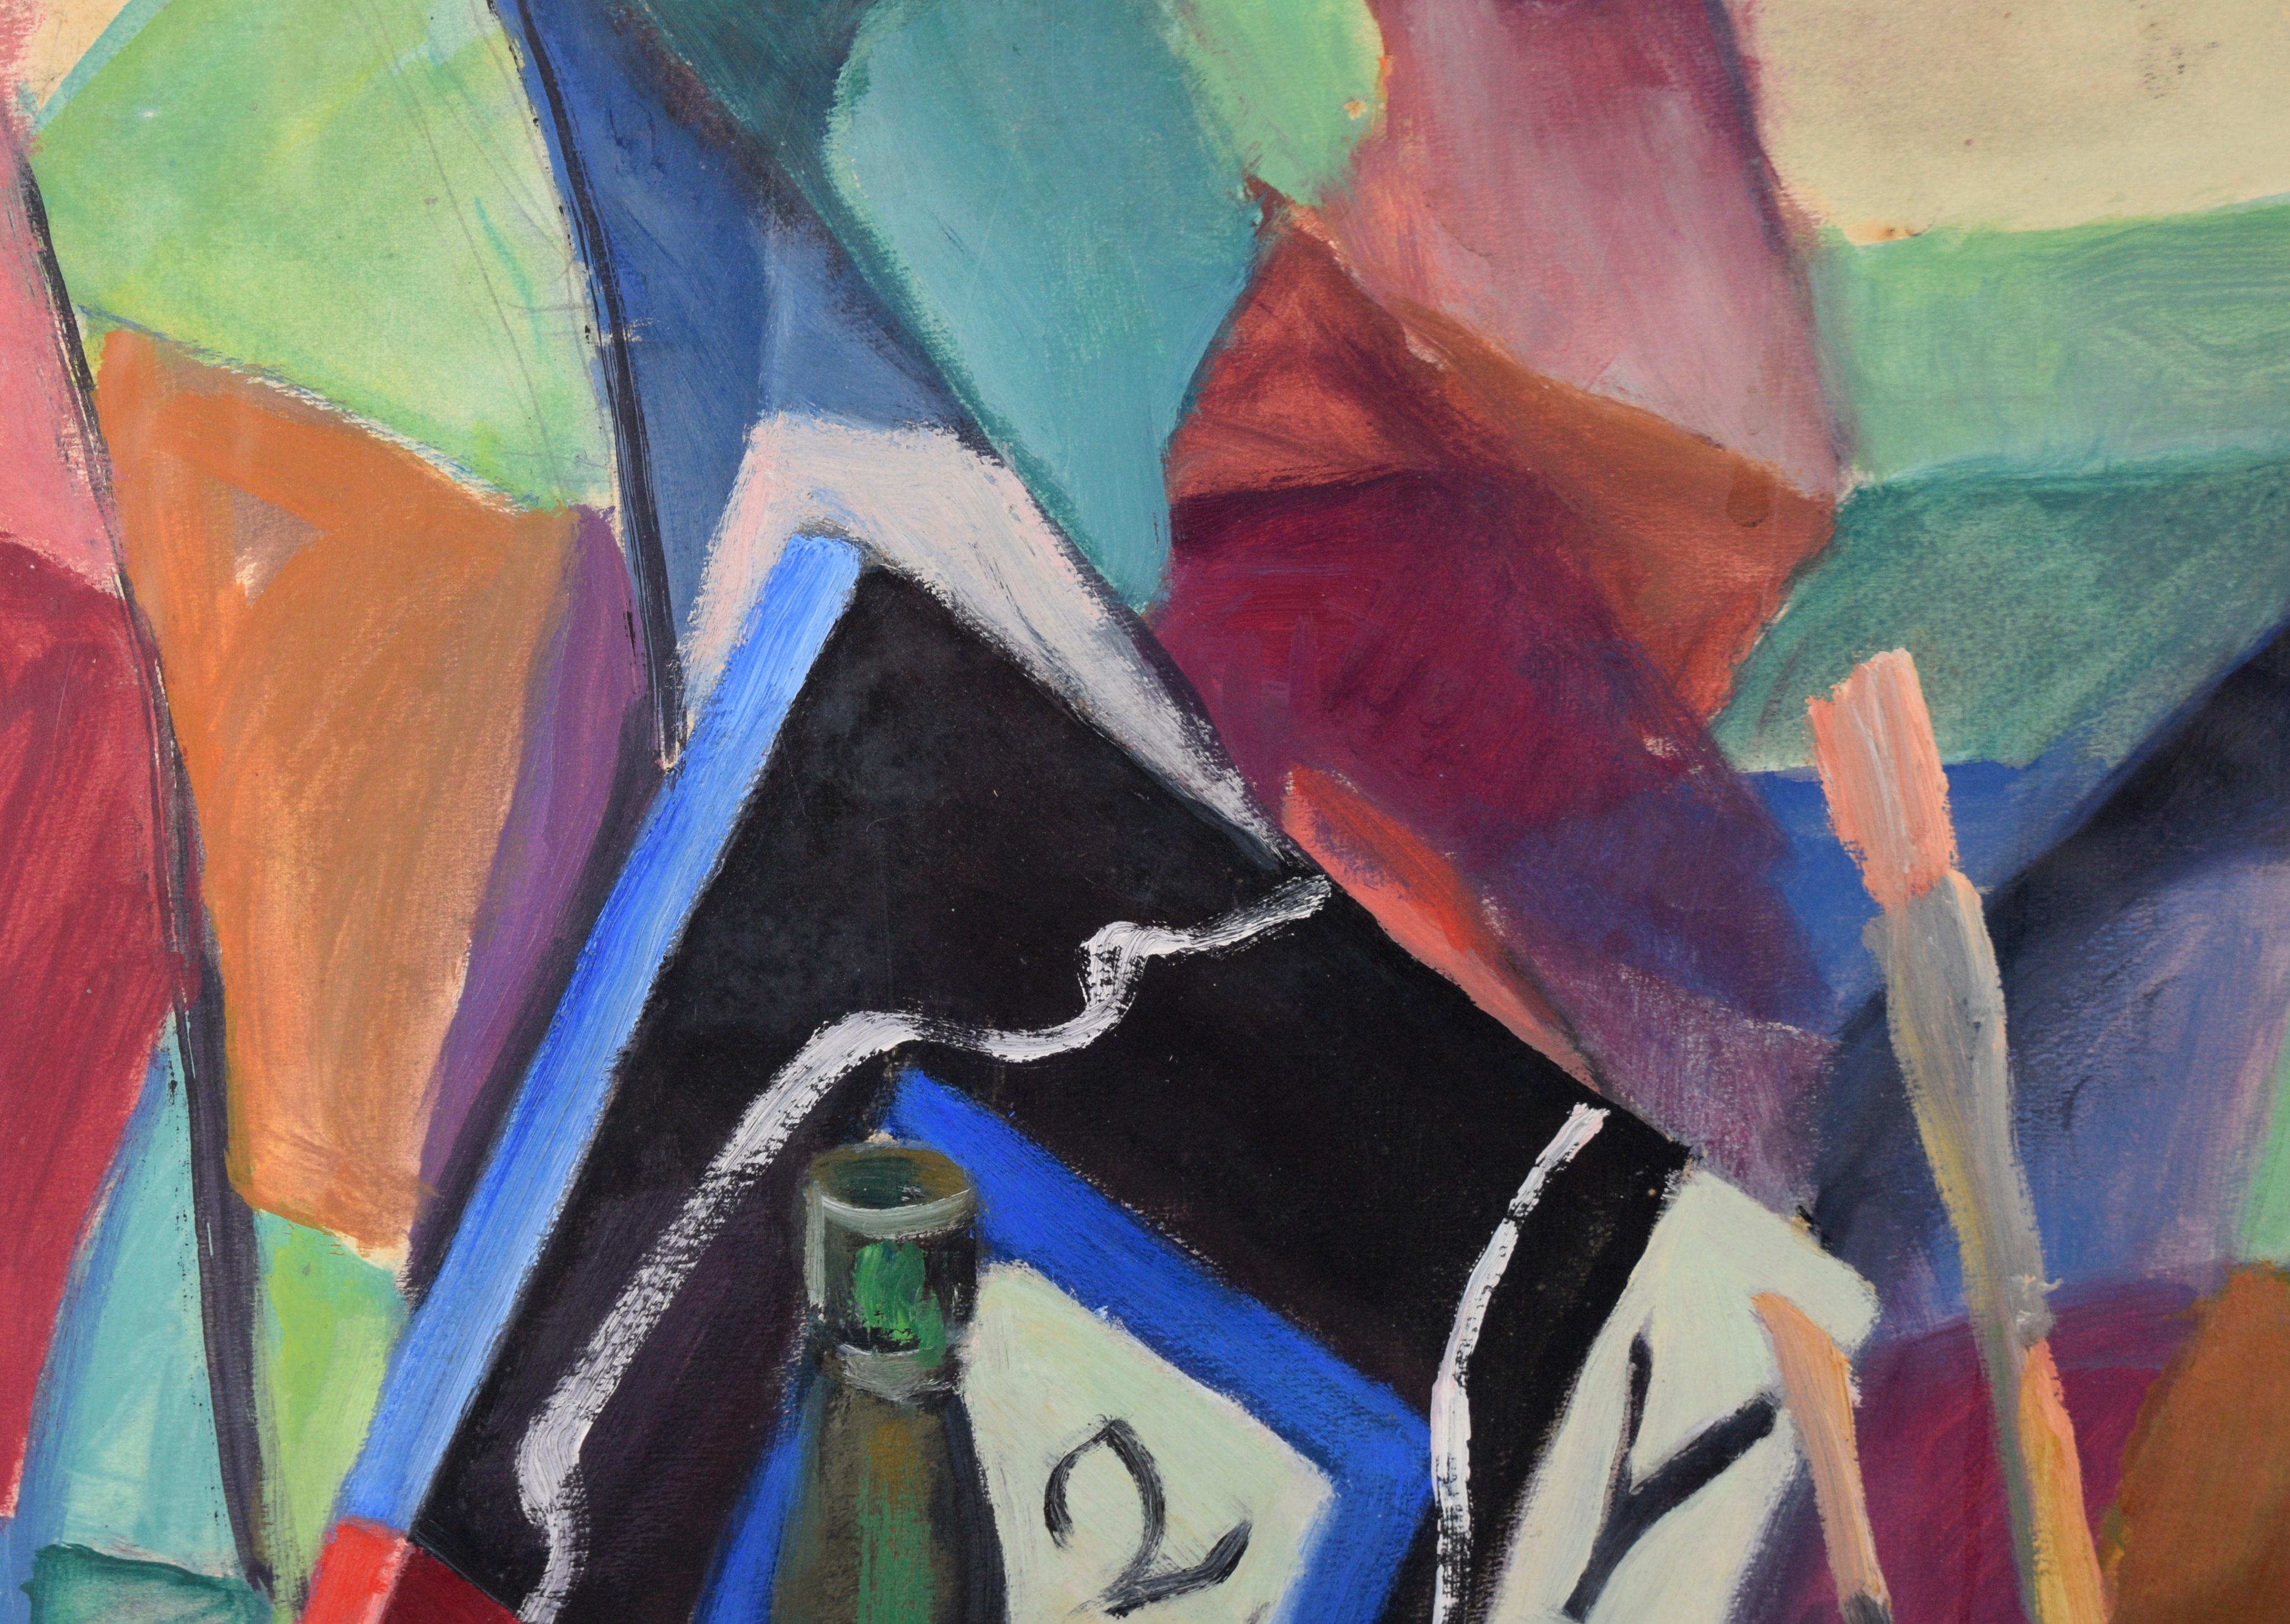 Still Life with Bottle, Paintbrushes, and Book in Oil on Paper - Post-Impressionist Painting by Louise Apthorp